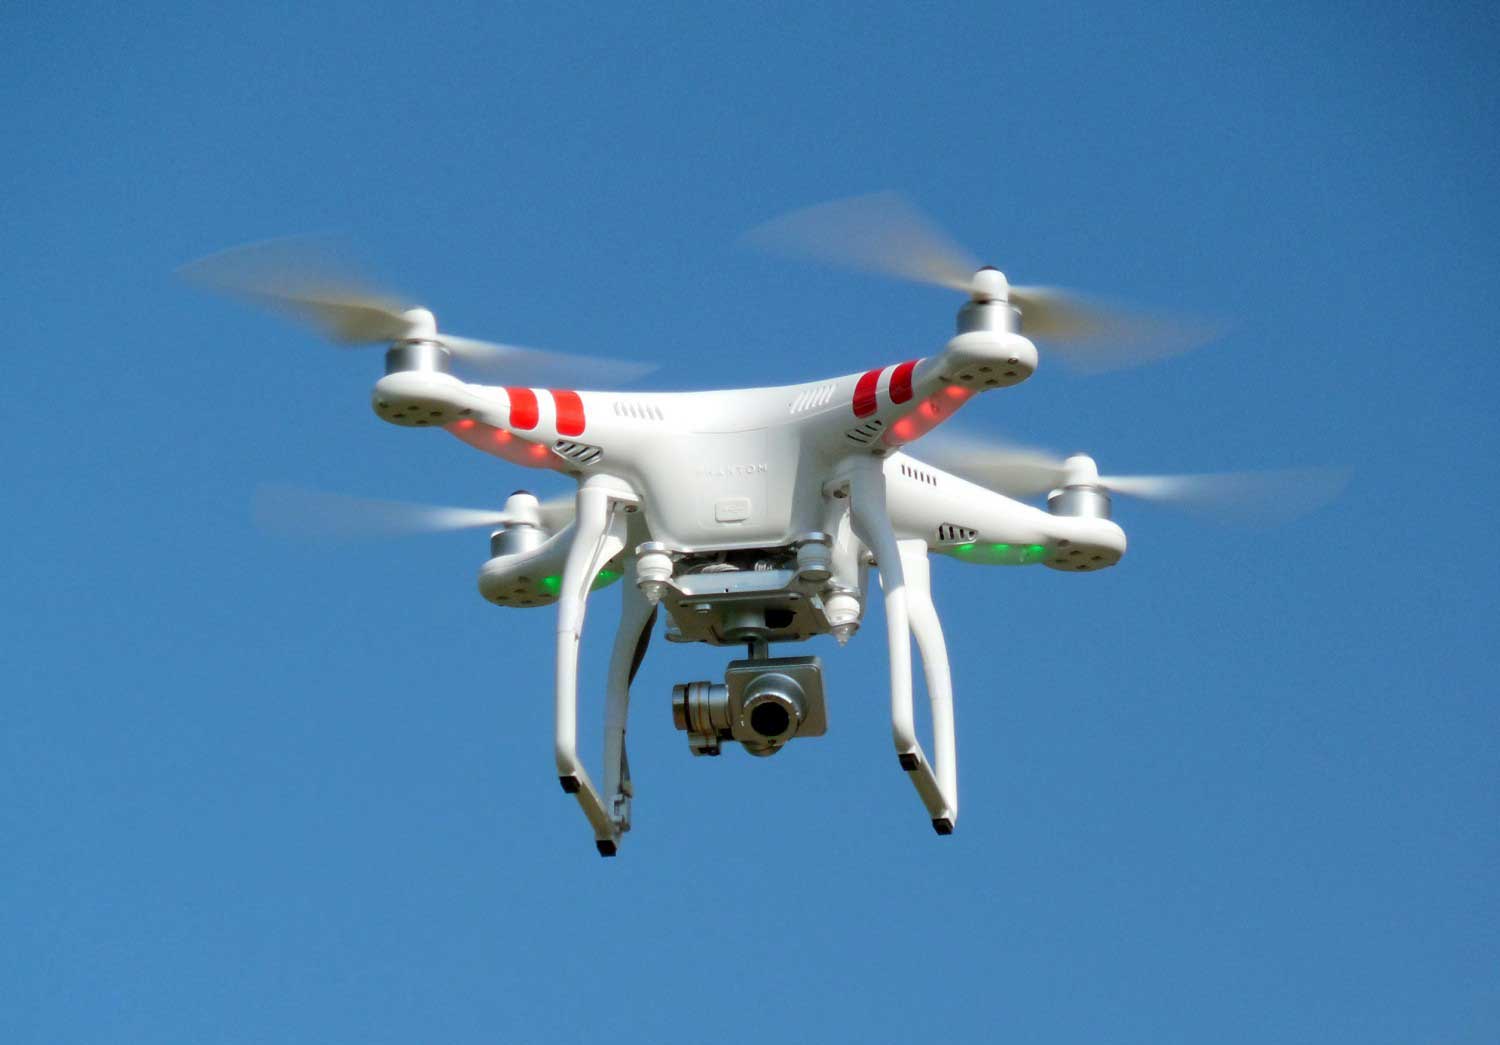 hermal surveillance drones are now becoming a reality to improve agriculture thanks to new FAA permits & Section 333.